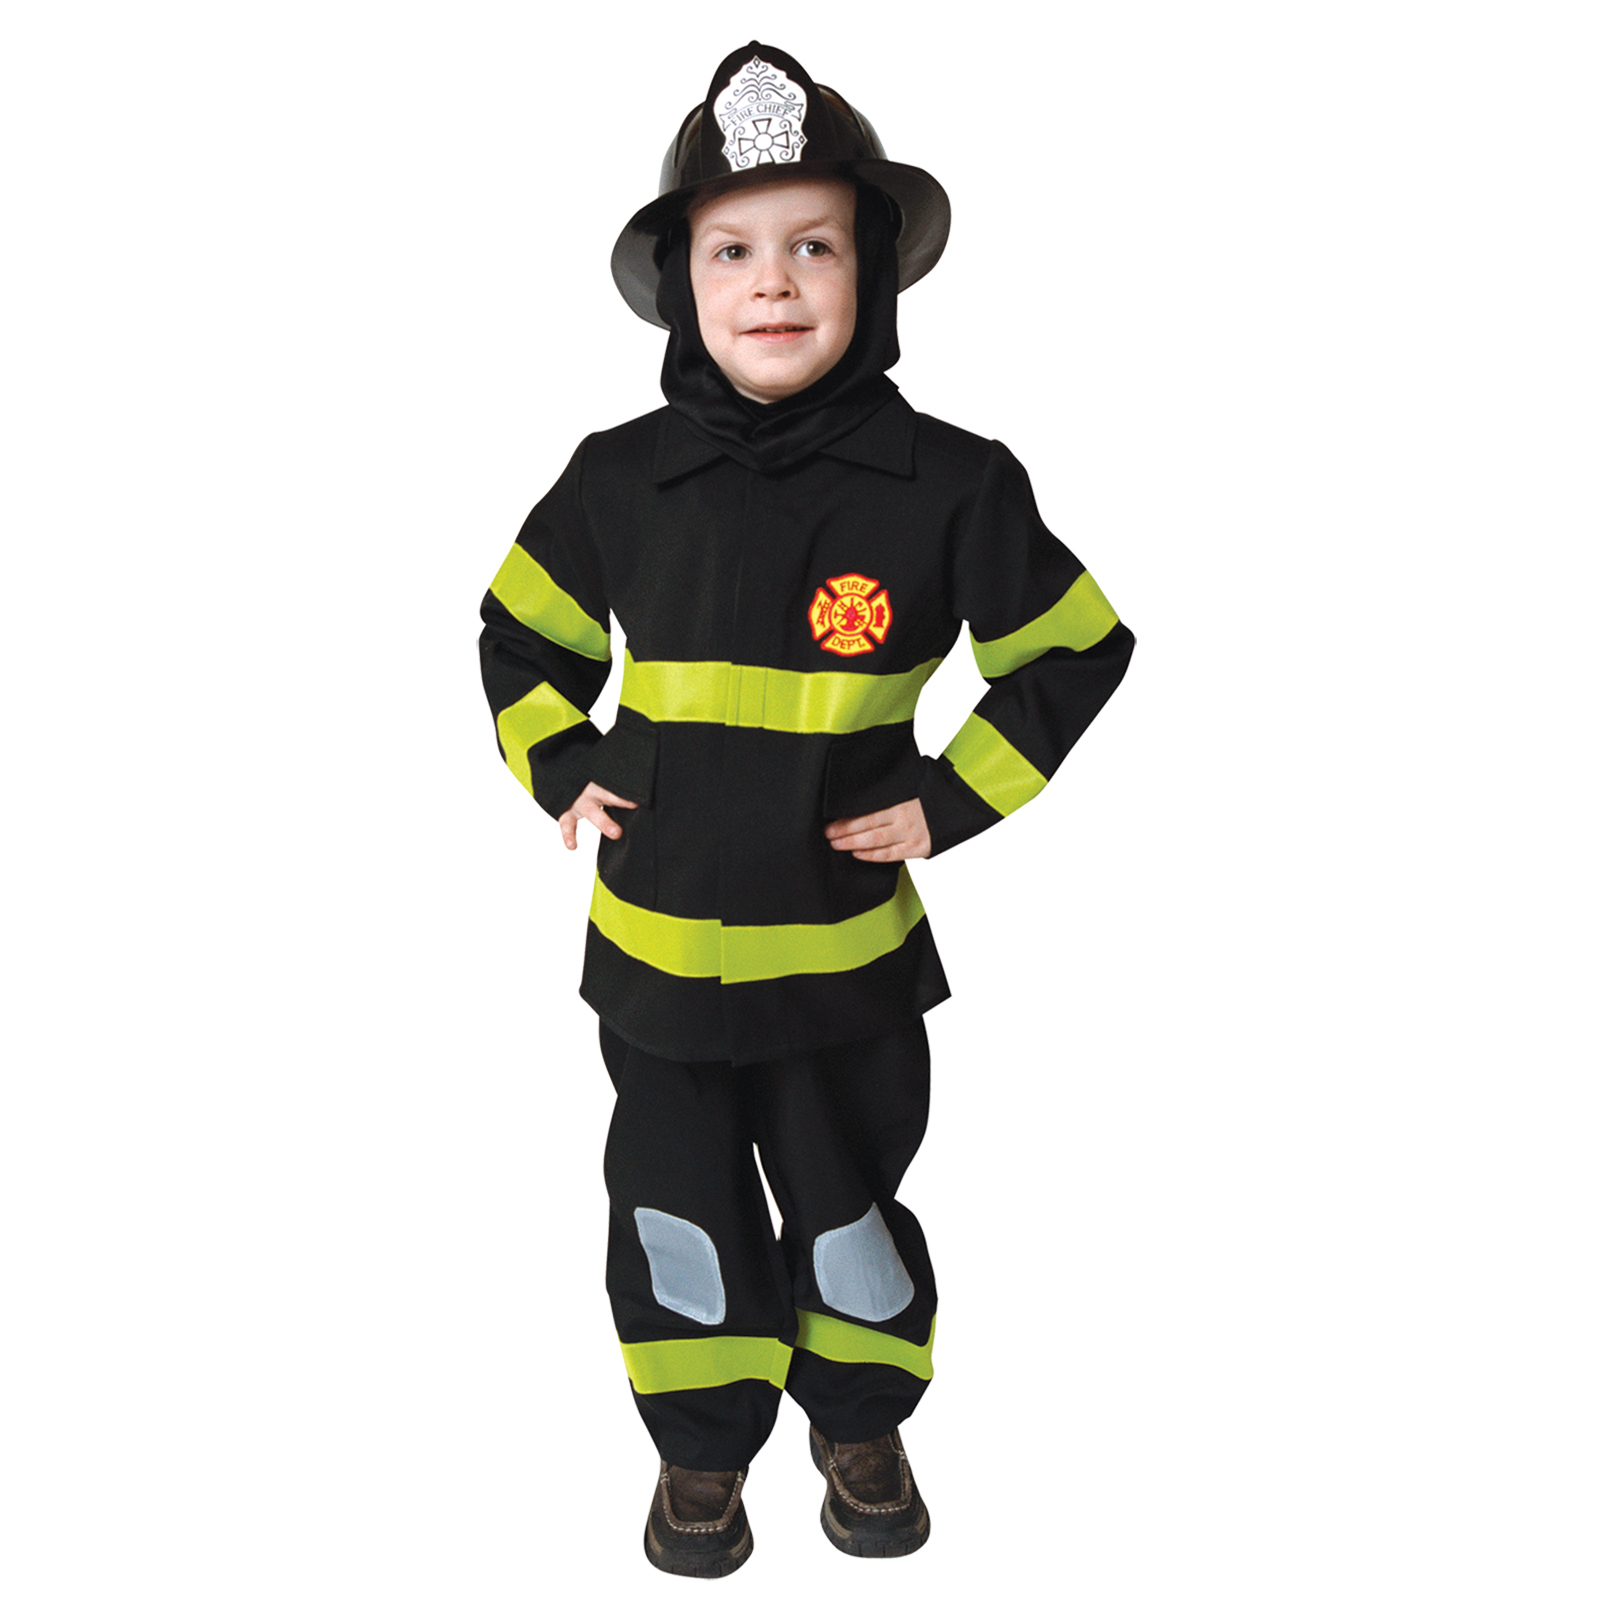 Toddler Fire Fighter Costume Size: 2T-4T